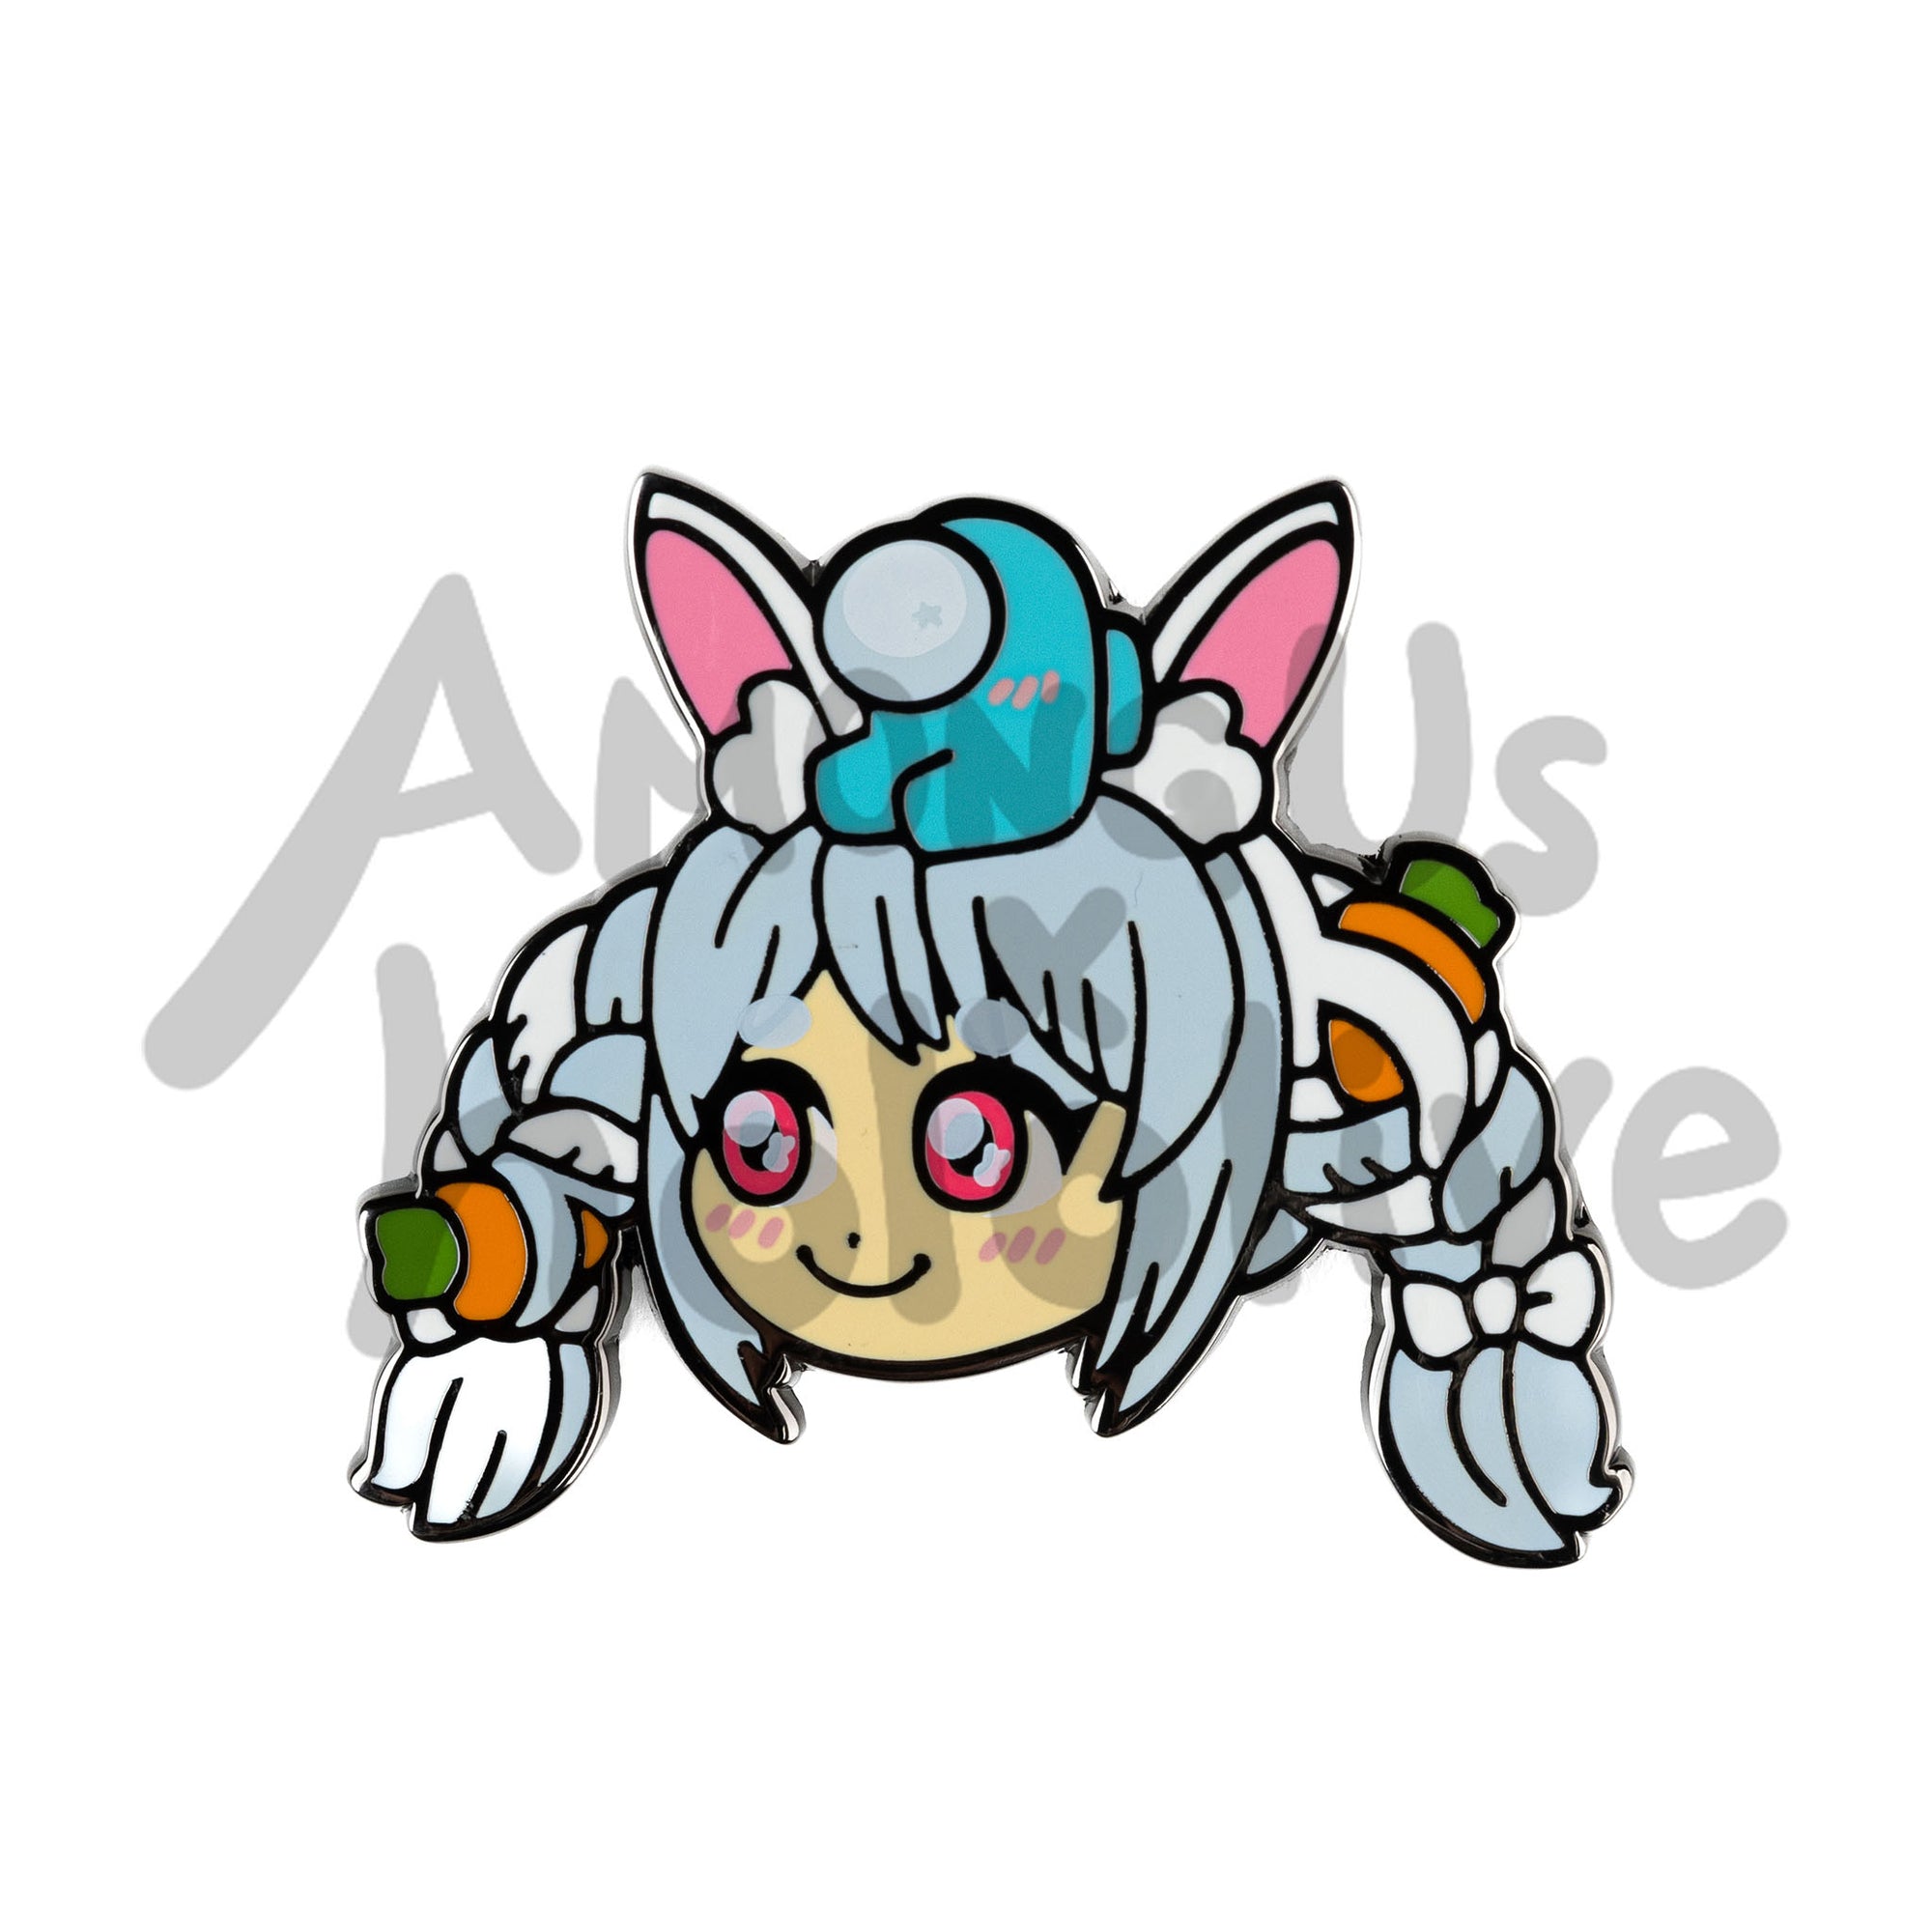 Enamel Pin of Usada Pekora's Face from Hololive. Pekora has fair skin, teal sparkly eyes, and light blue braided hair into large pigtails with two carrots woven throughout. She wears a white rabbit ears headband.  There's a Cyan sitting atop her head. Both characters have pink blush marks on their faces.